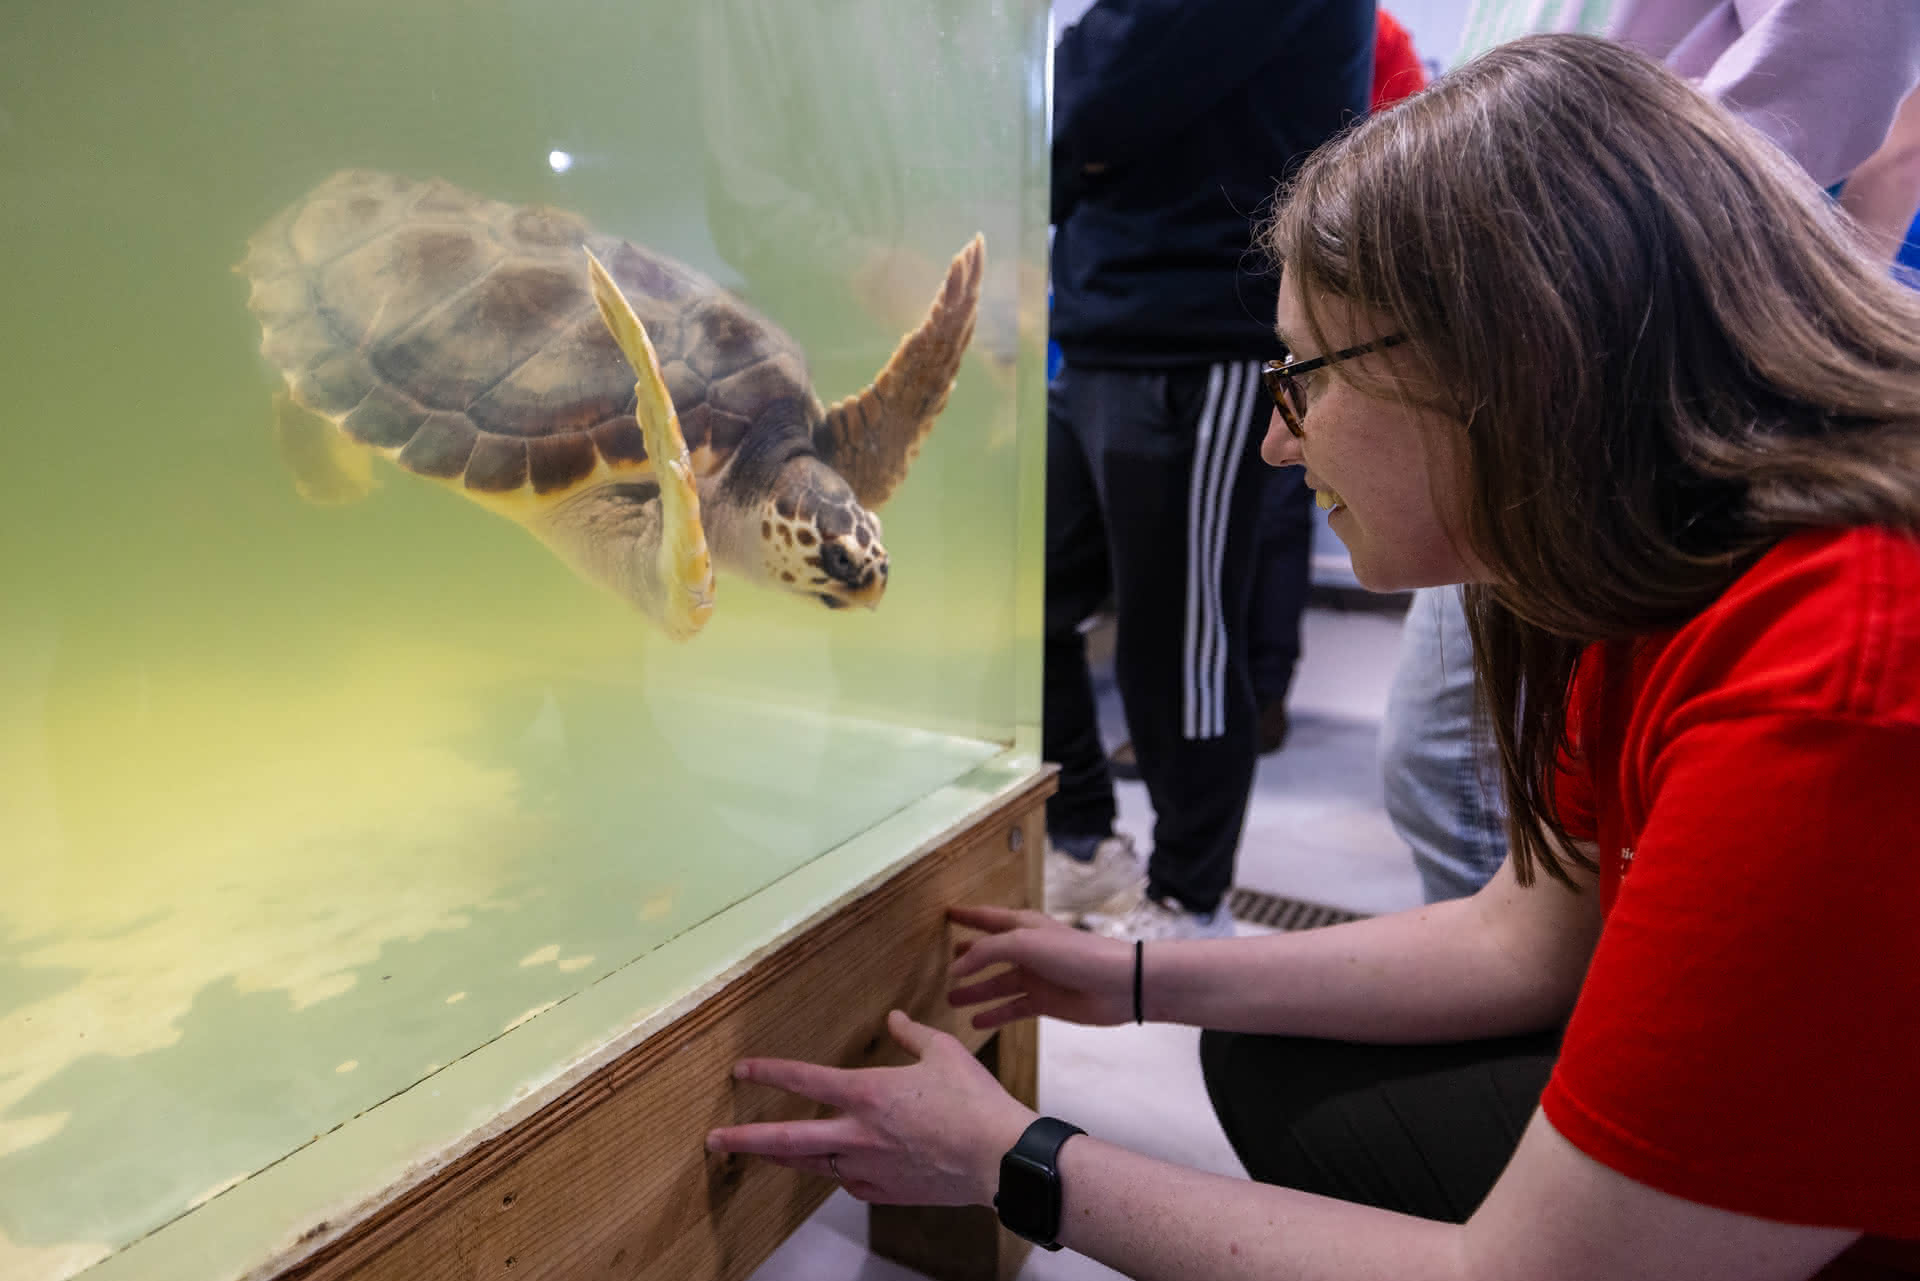 A student looking at a turtle in a tank at an aquarium